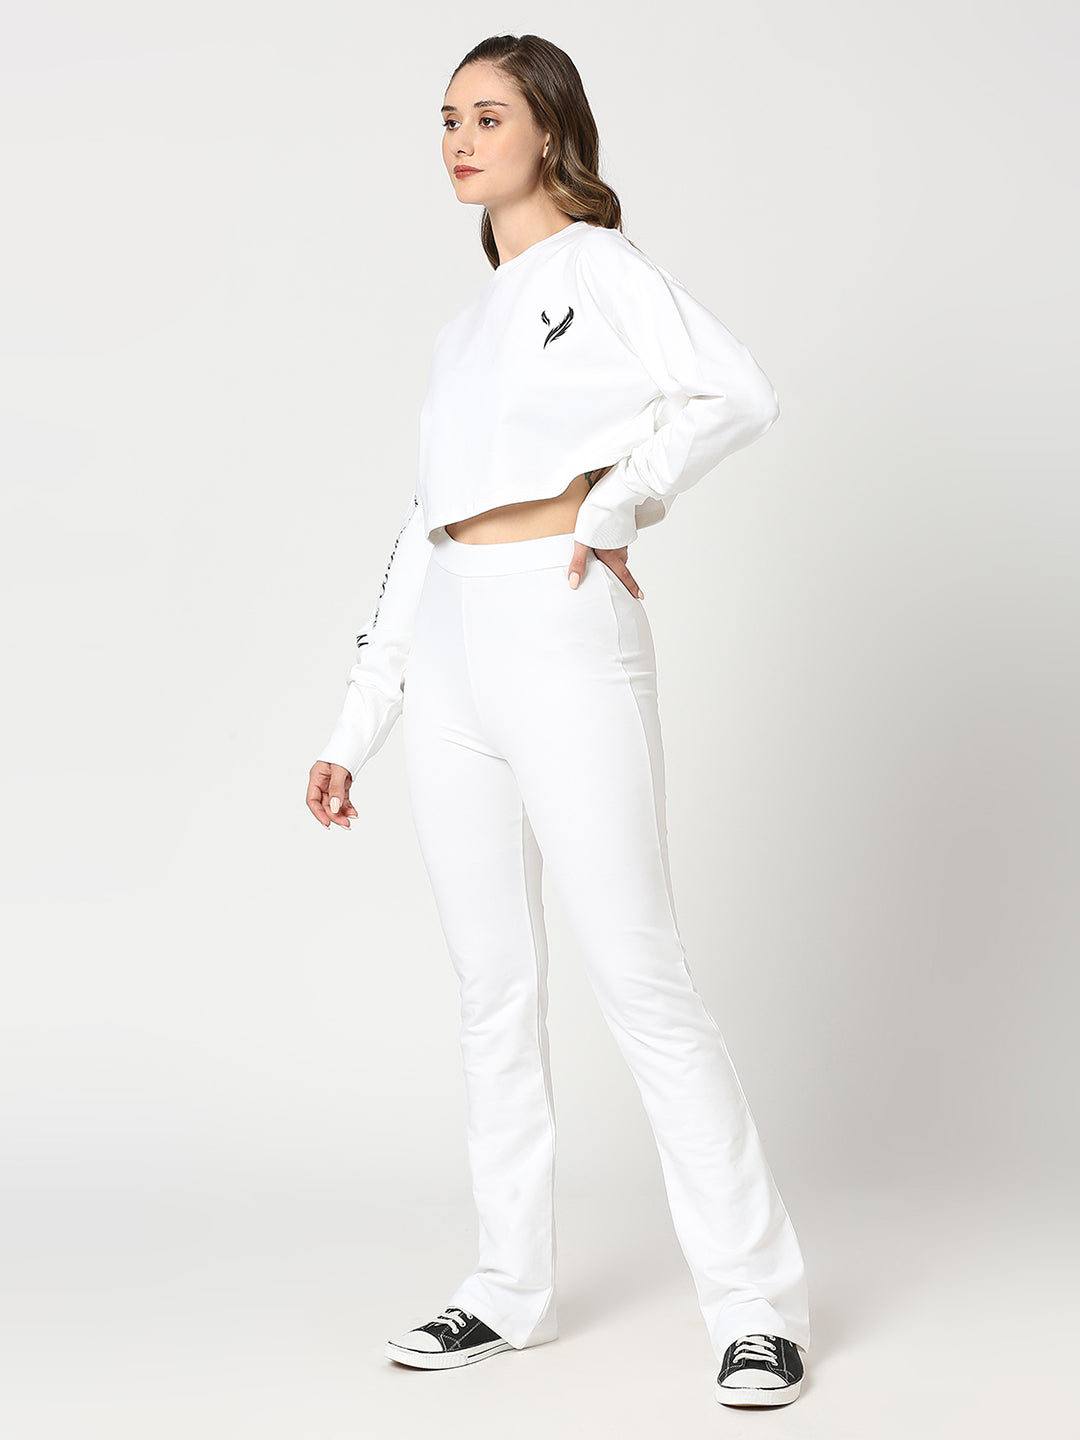 Bright white cropped top and full pants Co-Ords set.